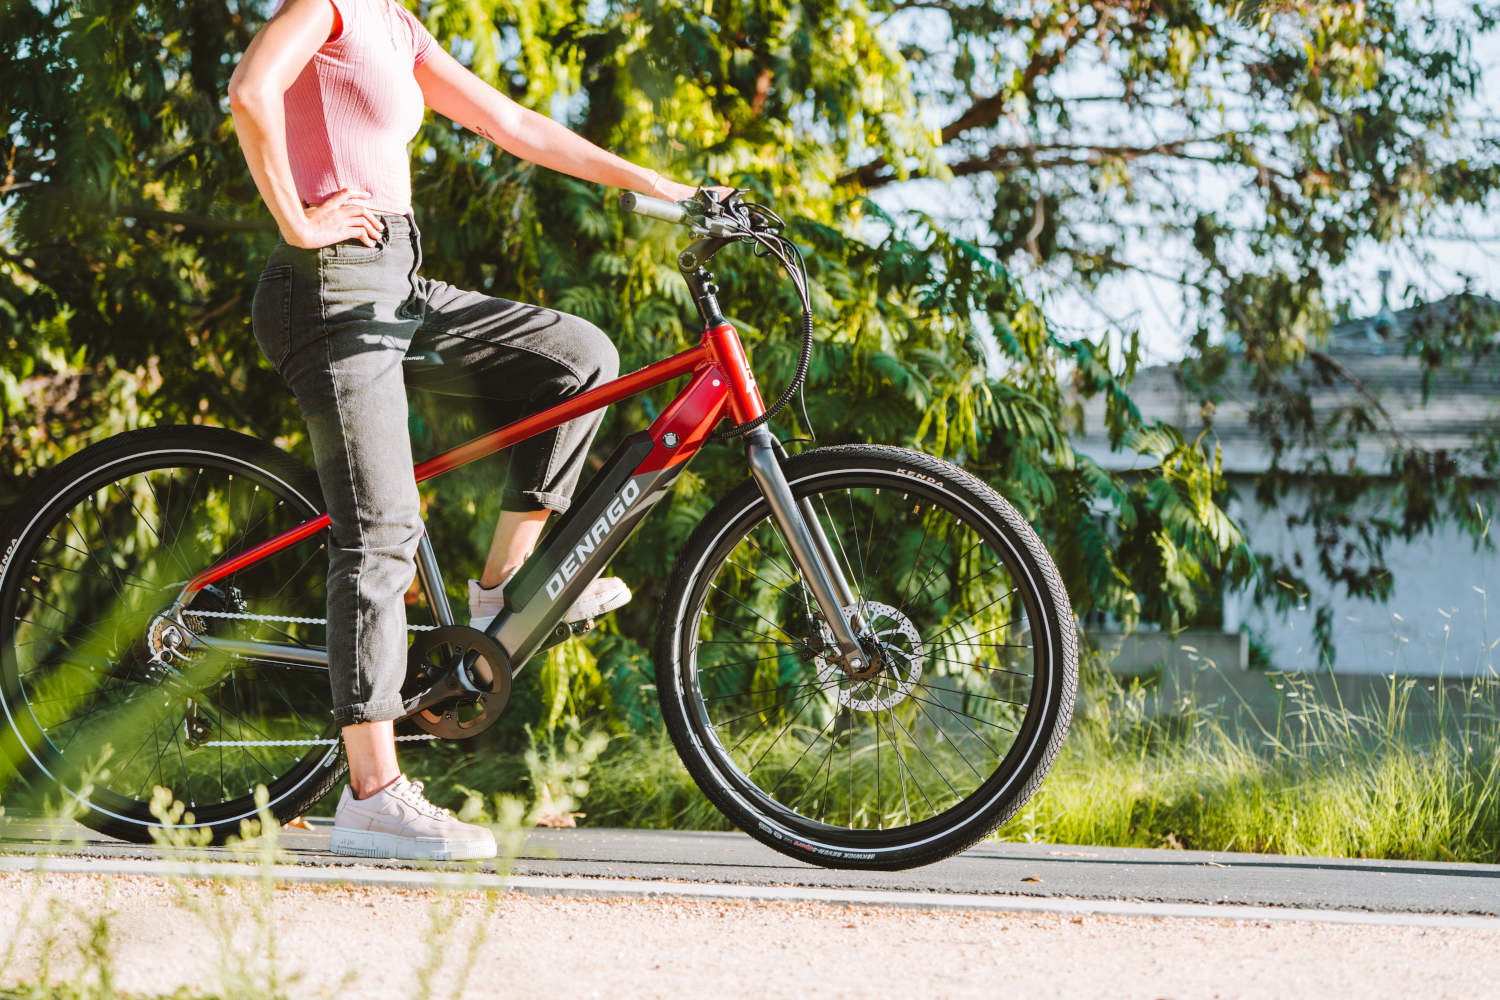 Woman sitting on eBike displaying the Denago logo with bushes in the background.